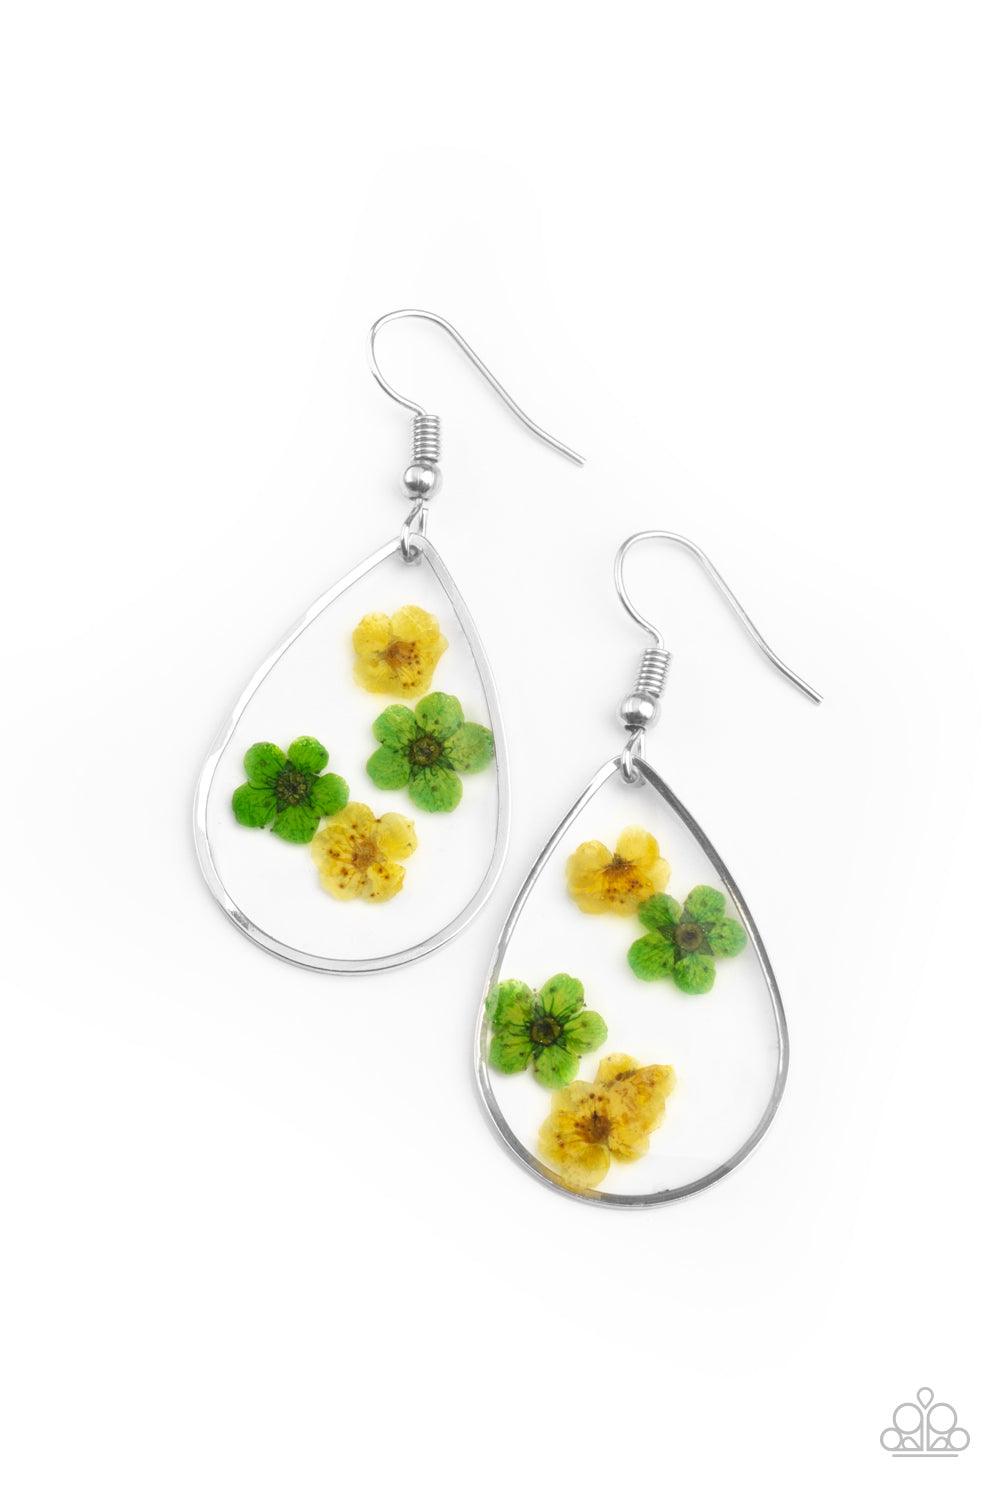 Paparazzi Accessories Perennial Prairie - Yellow Dainty yellow and green flowers are encased in a glassy teardrop, creating a whimsical frame. Earring attaches to a standard fishhook fitting. Sold as one pair of earrings. Jewelry